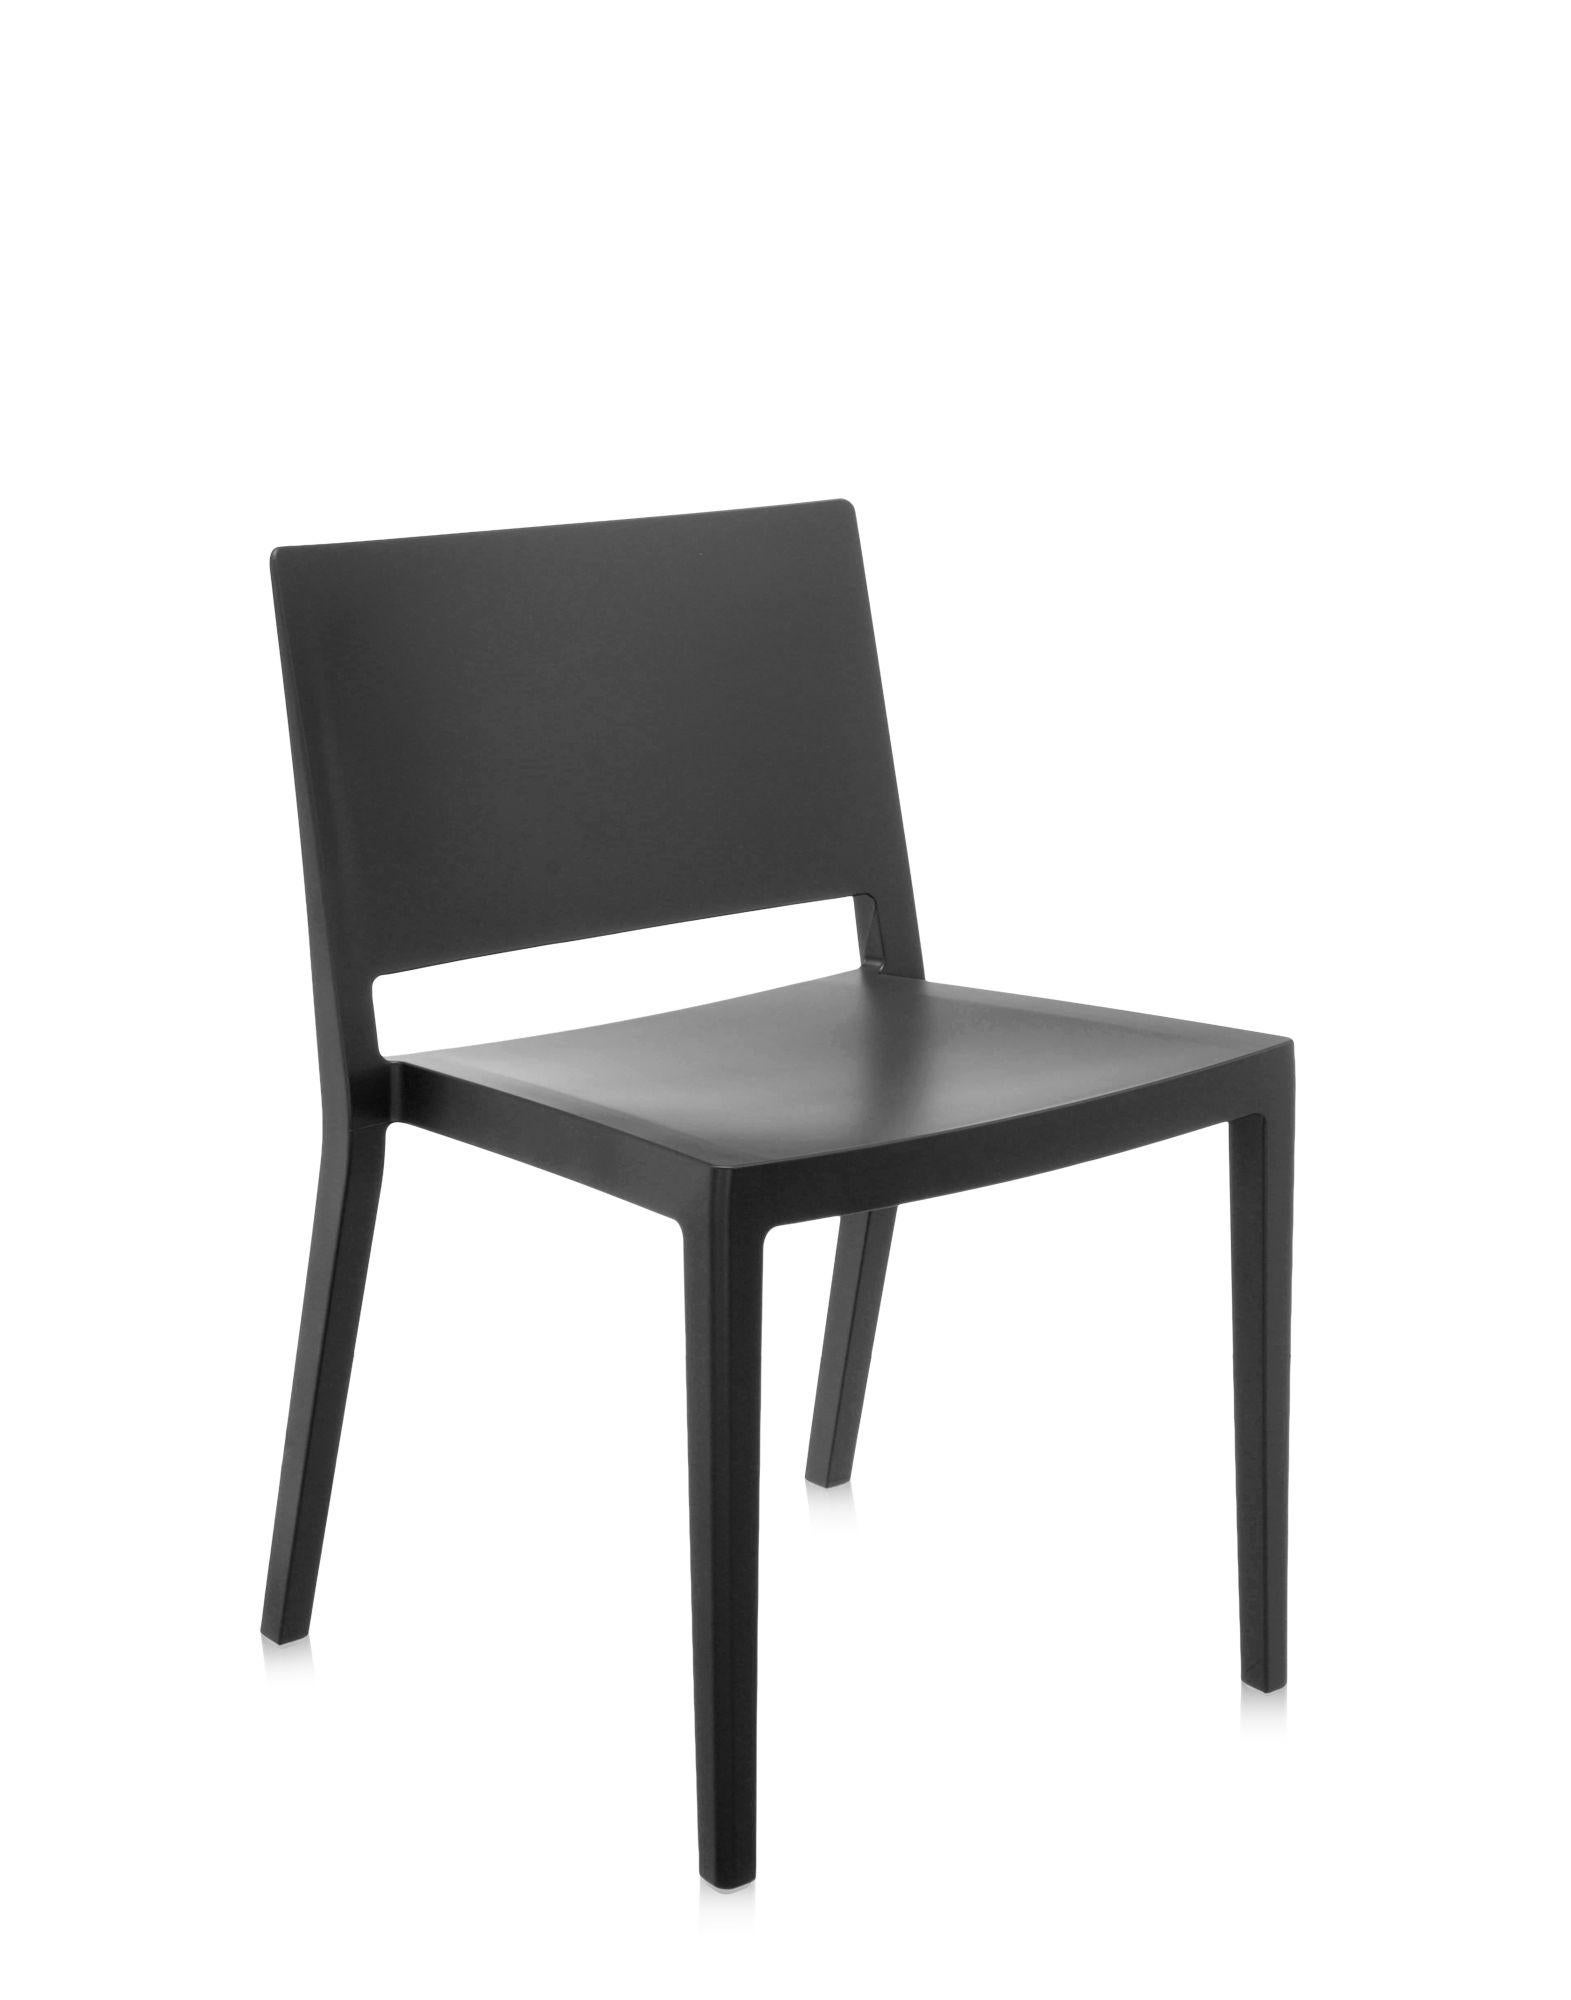 A lightweight chair, with essential, strict lines, in synch with the minimalist and refined style of its designer, Piero Lissoni. Lizz is now also available in a matte version with six colors, evocative of typical Scandinavian design, with a